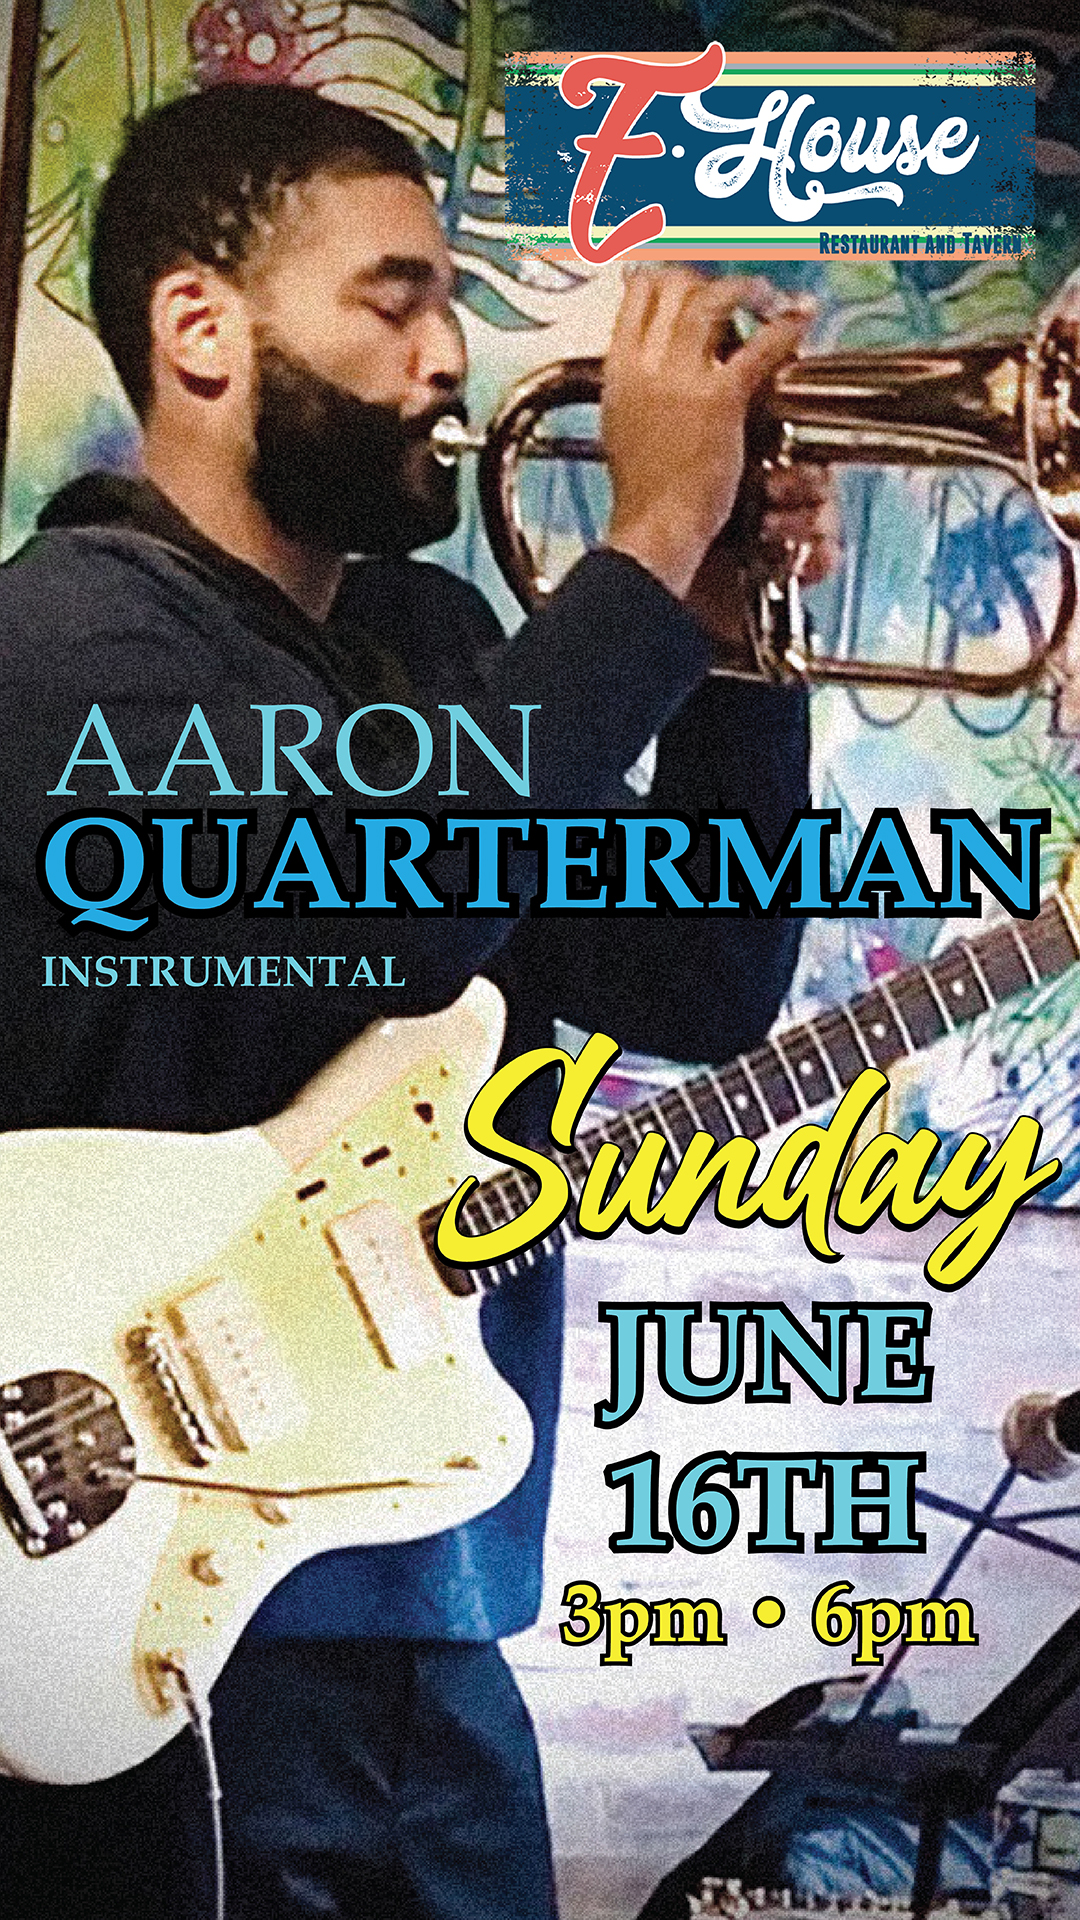 Poster of Aaron Quarterman playing guitar and trumpet. Text reads: "E House Restaurant and Tavern. Aaron Quarterman Instrumental. Sunday, June 16th, 3pm - 6pm.